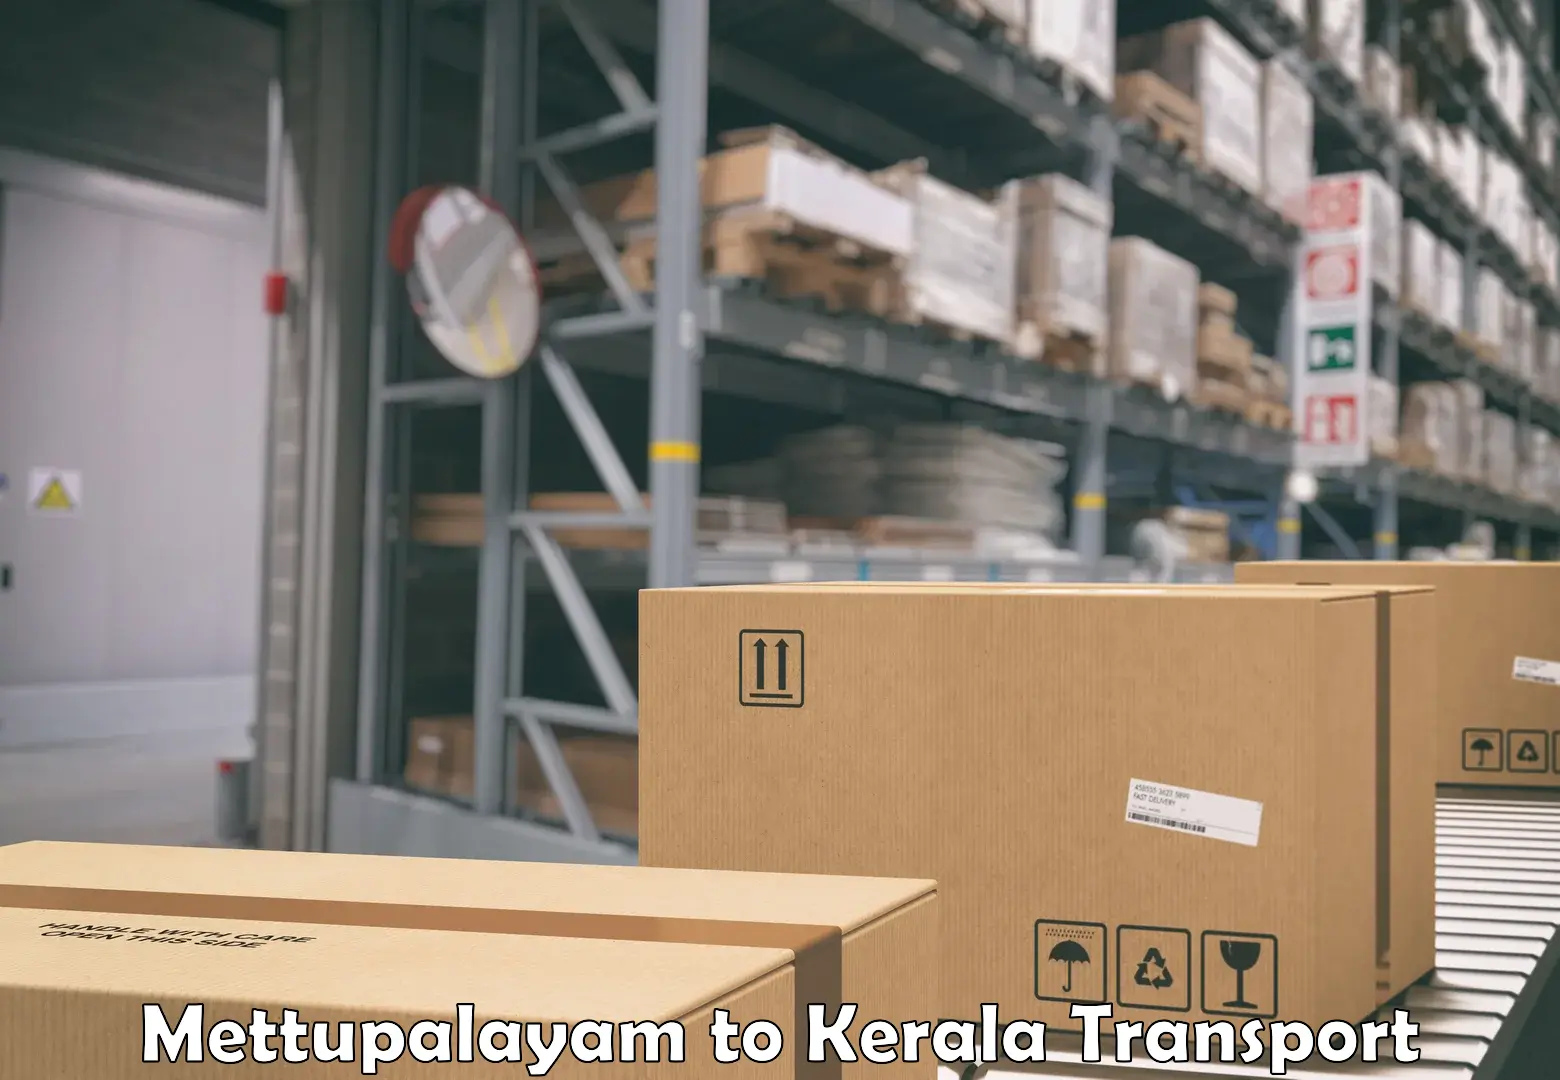 Container transport service Mettupalayam to Kerala